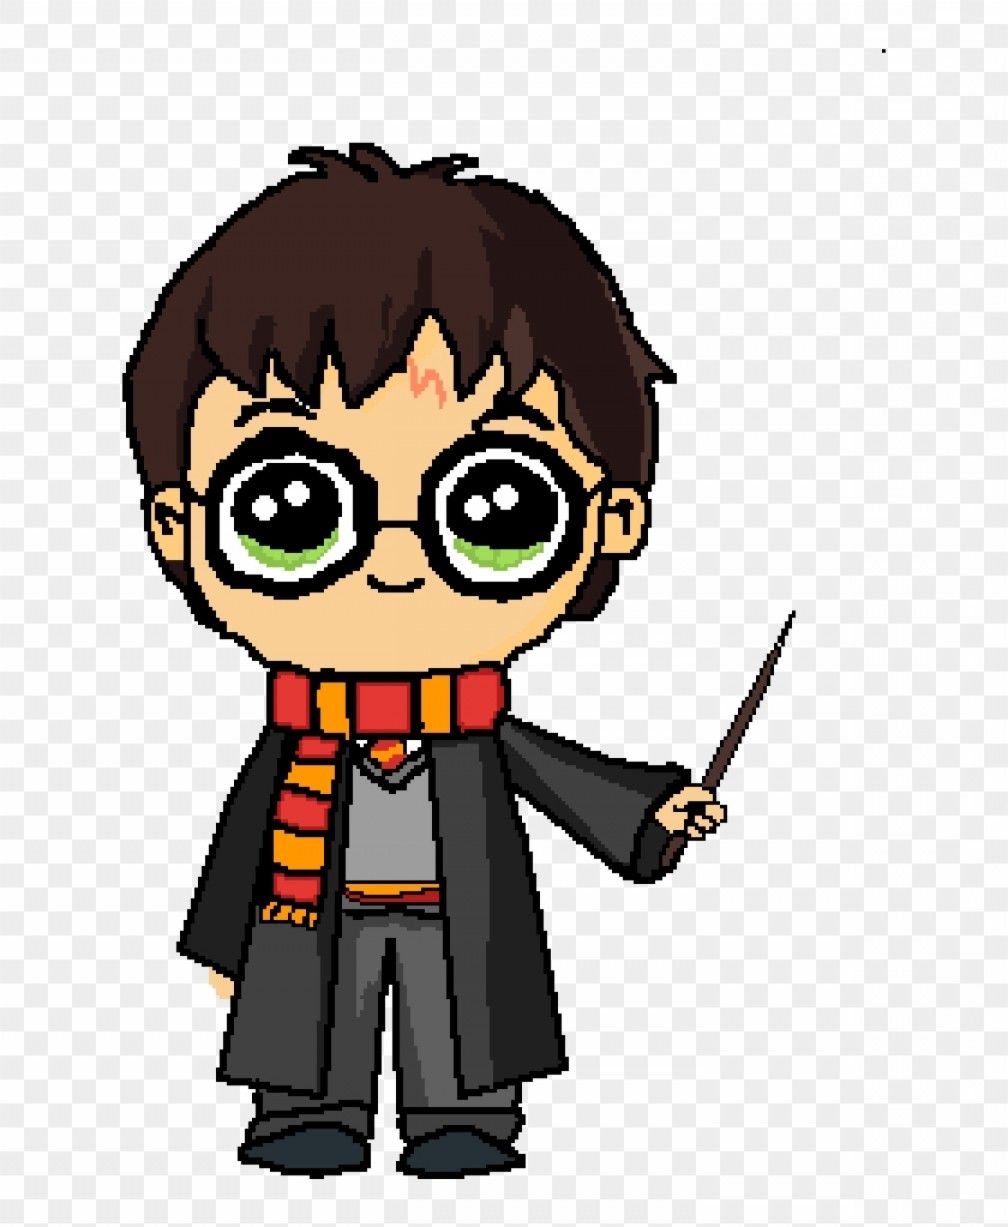 Harry Potter Cartoon Images For Drawing Harry potter cartoon icon ...